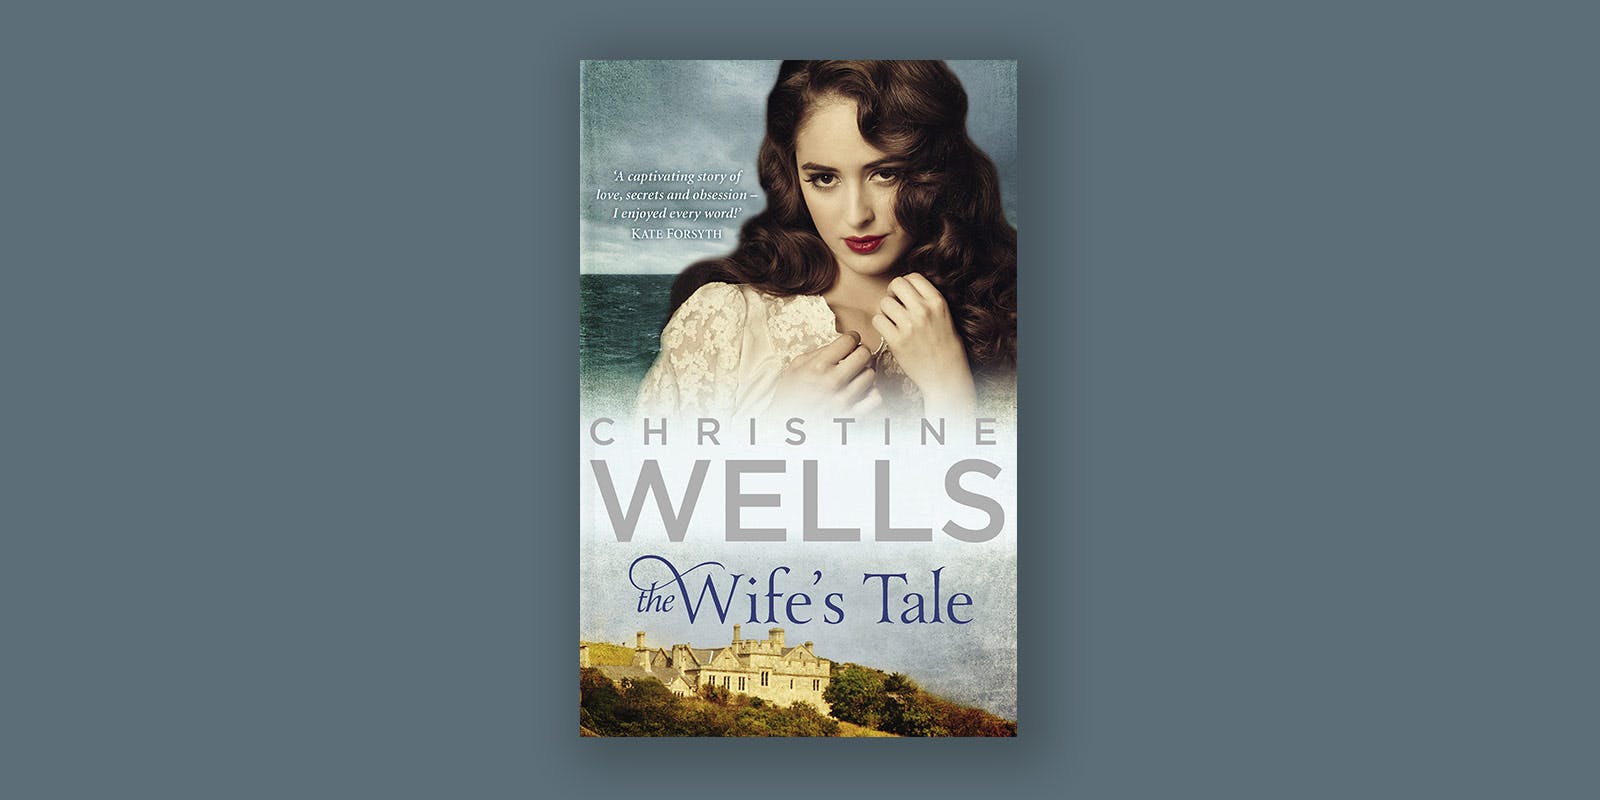 Get to know Christine Wells